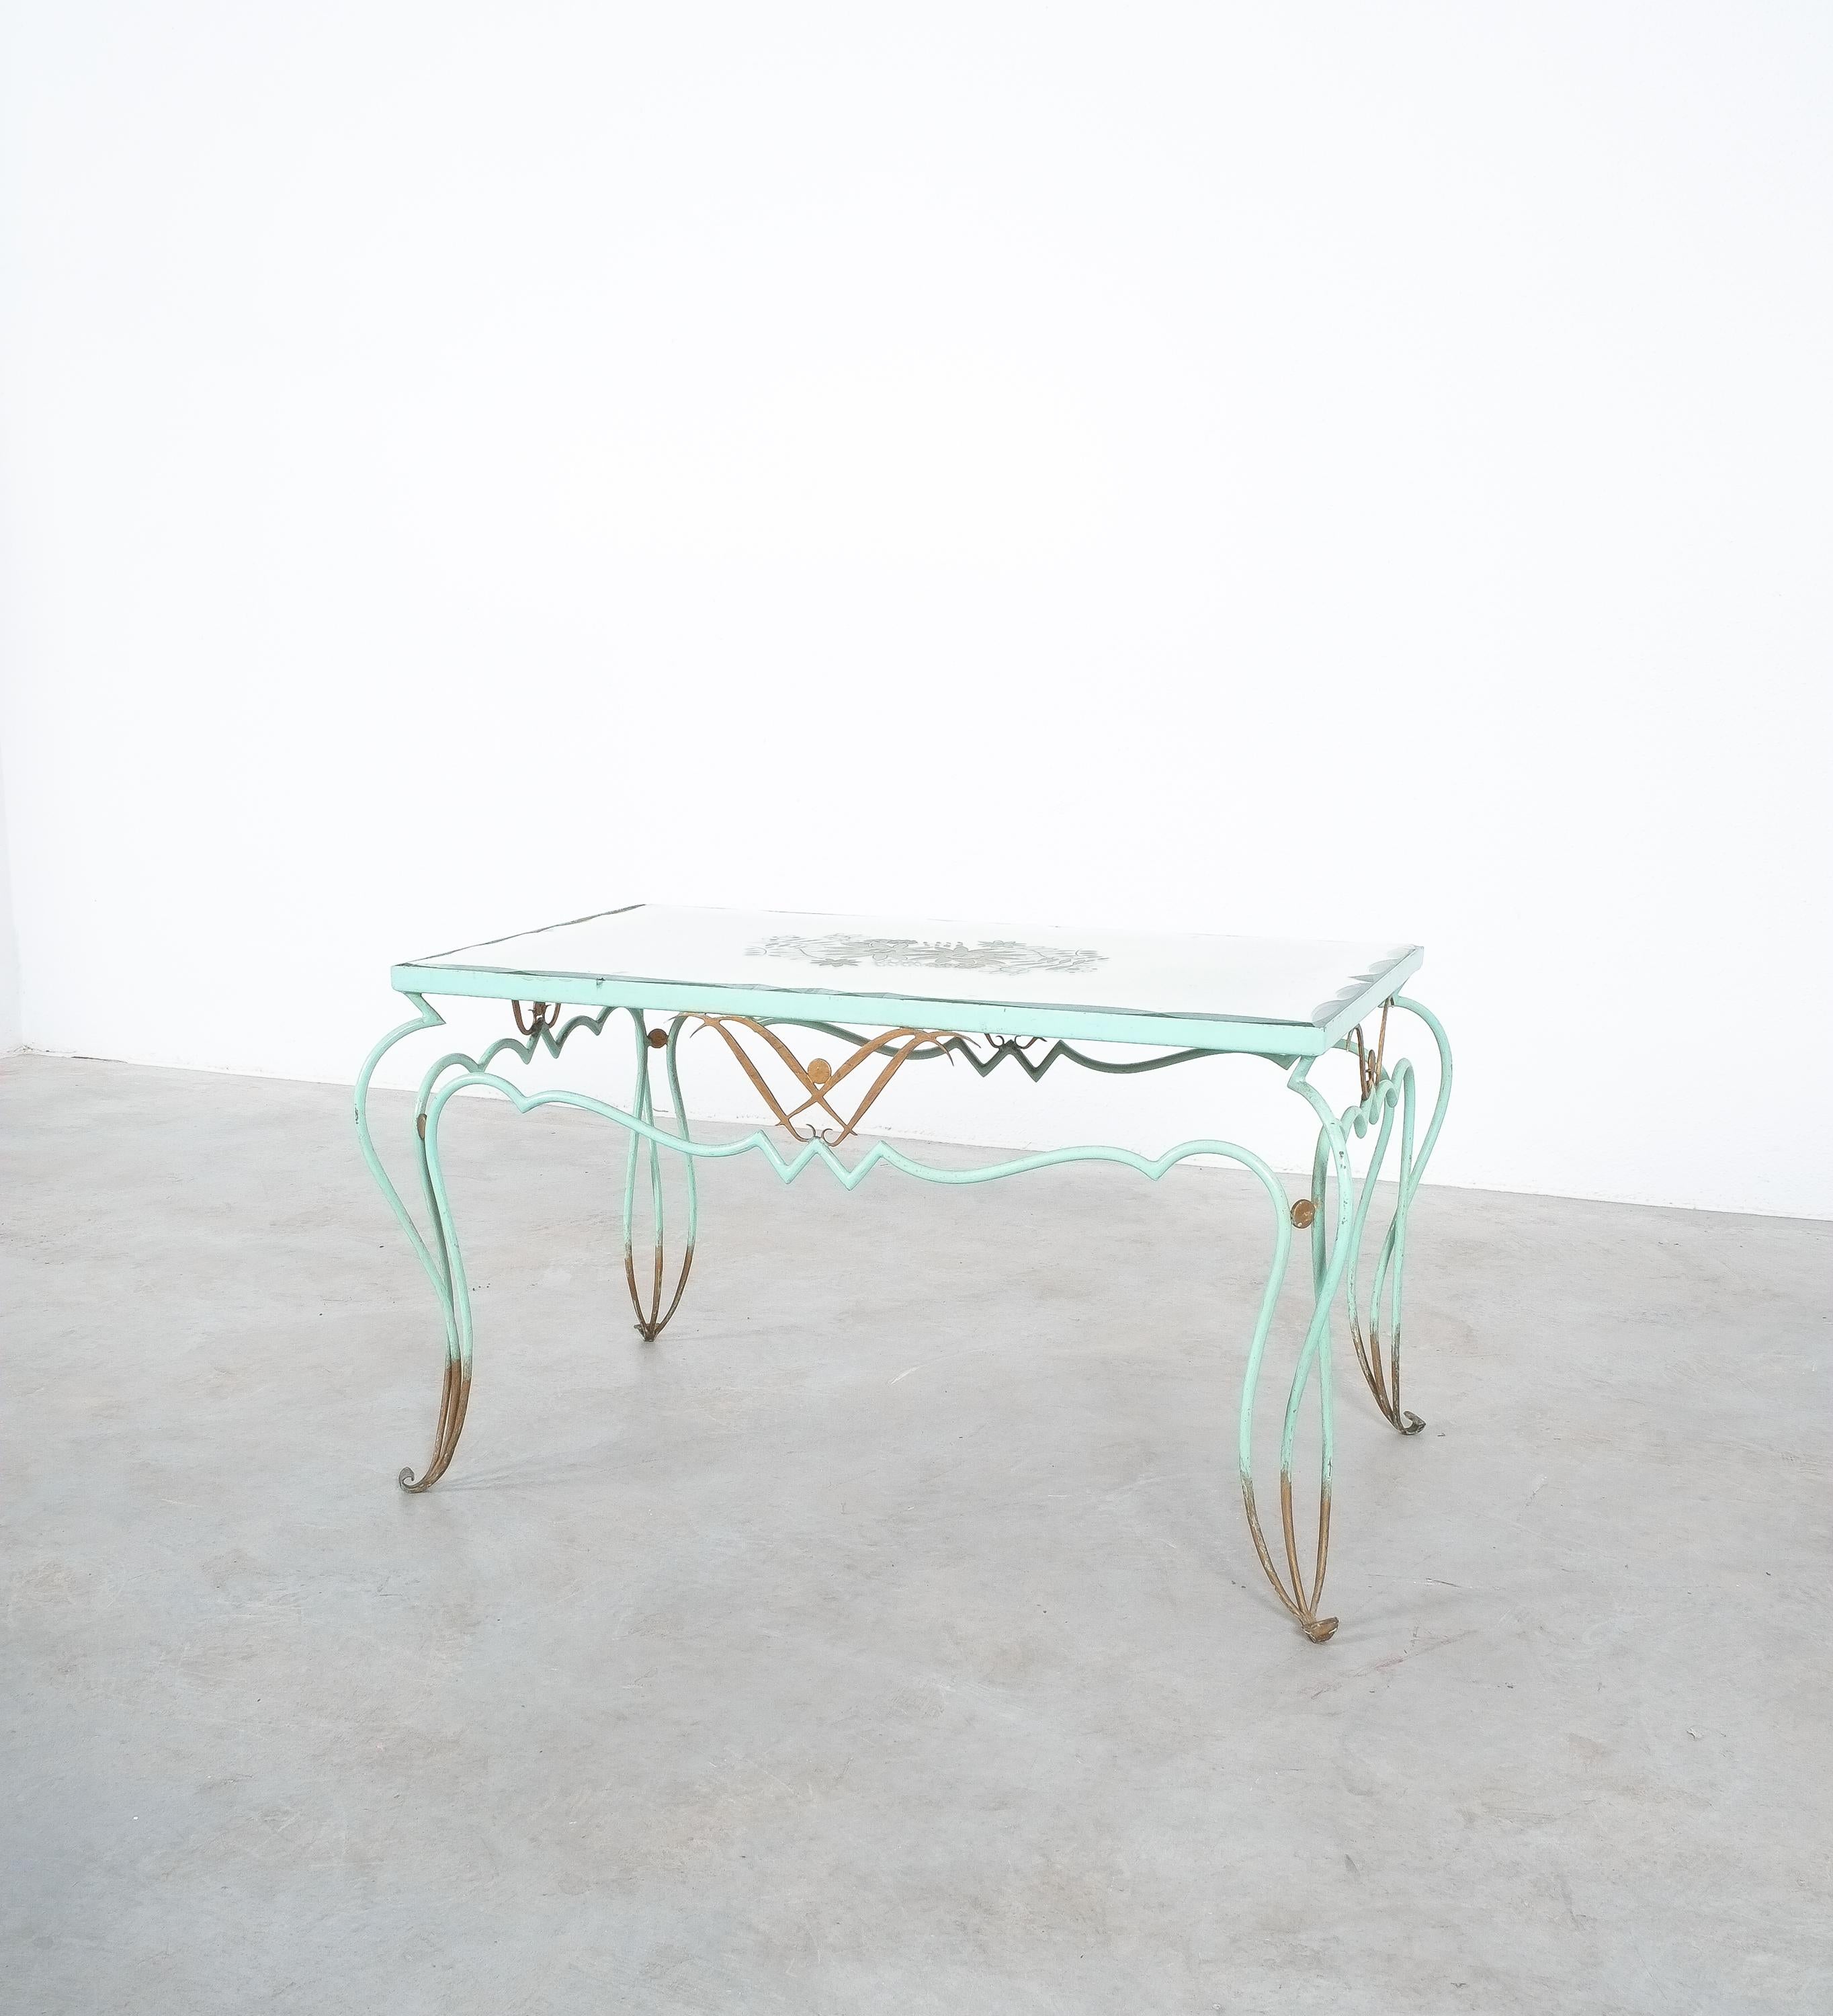 Iconic etched mirrored glass and painted and gilt wrought iron French 1940s coffee table, René Drouet

Elegant handmade wrought iron table in original mint color and golden accents. The original églomisé mirror top was probably created by Pierre